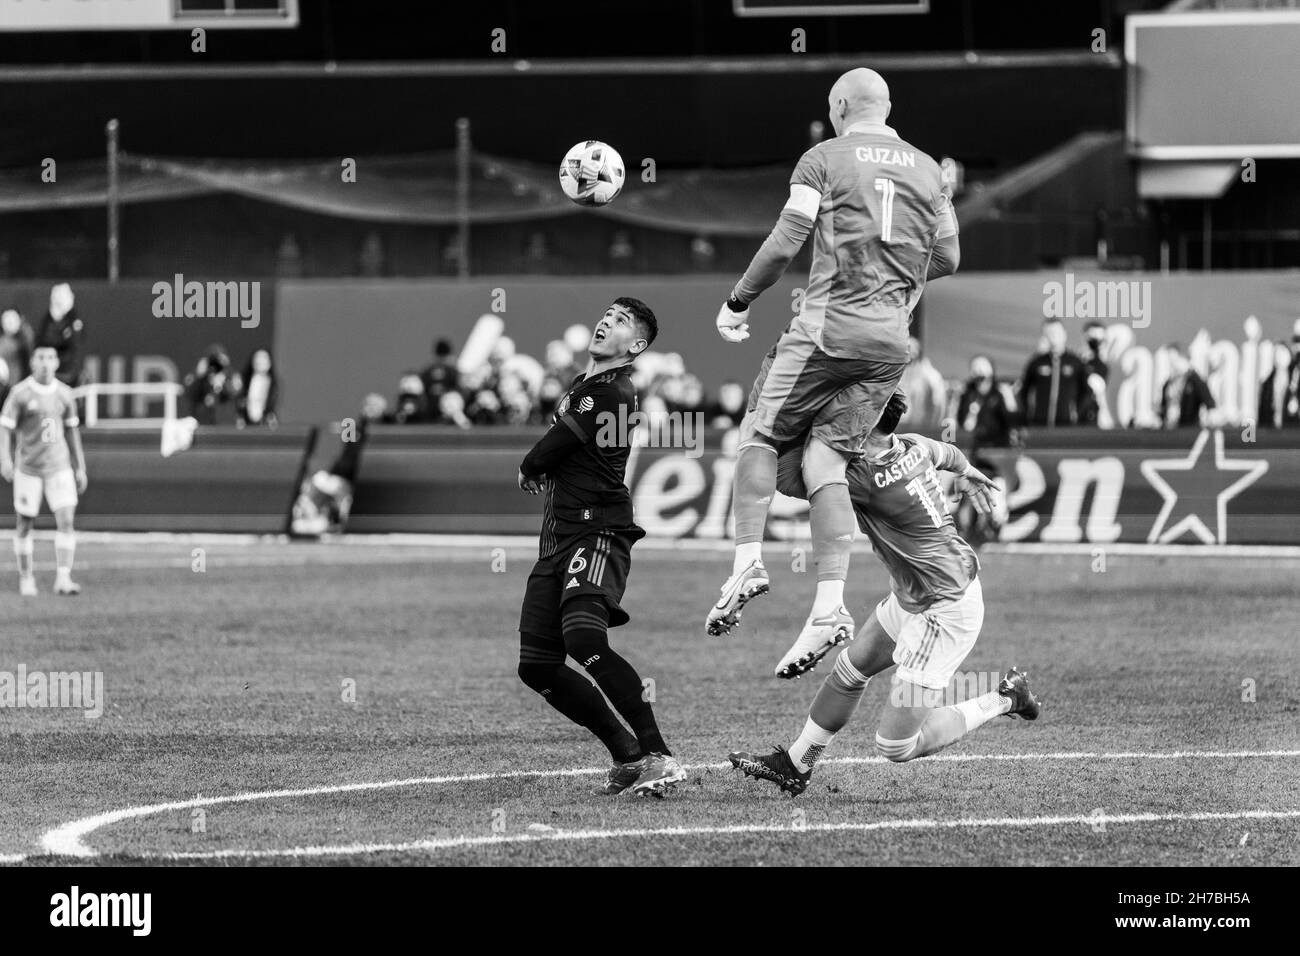 New York, NY - November 21, 2021: Alan Franco (6) of Atlanta United defends during first round game of MLS Cup versus NYCFC on Yankee stadium Stock Photo